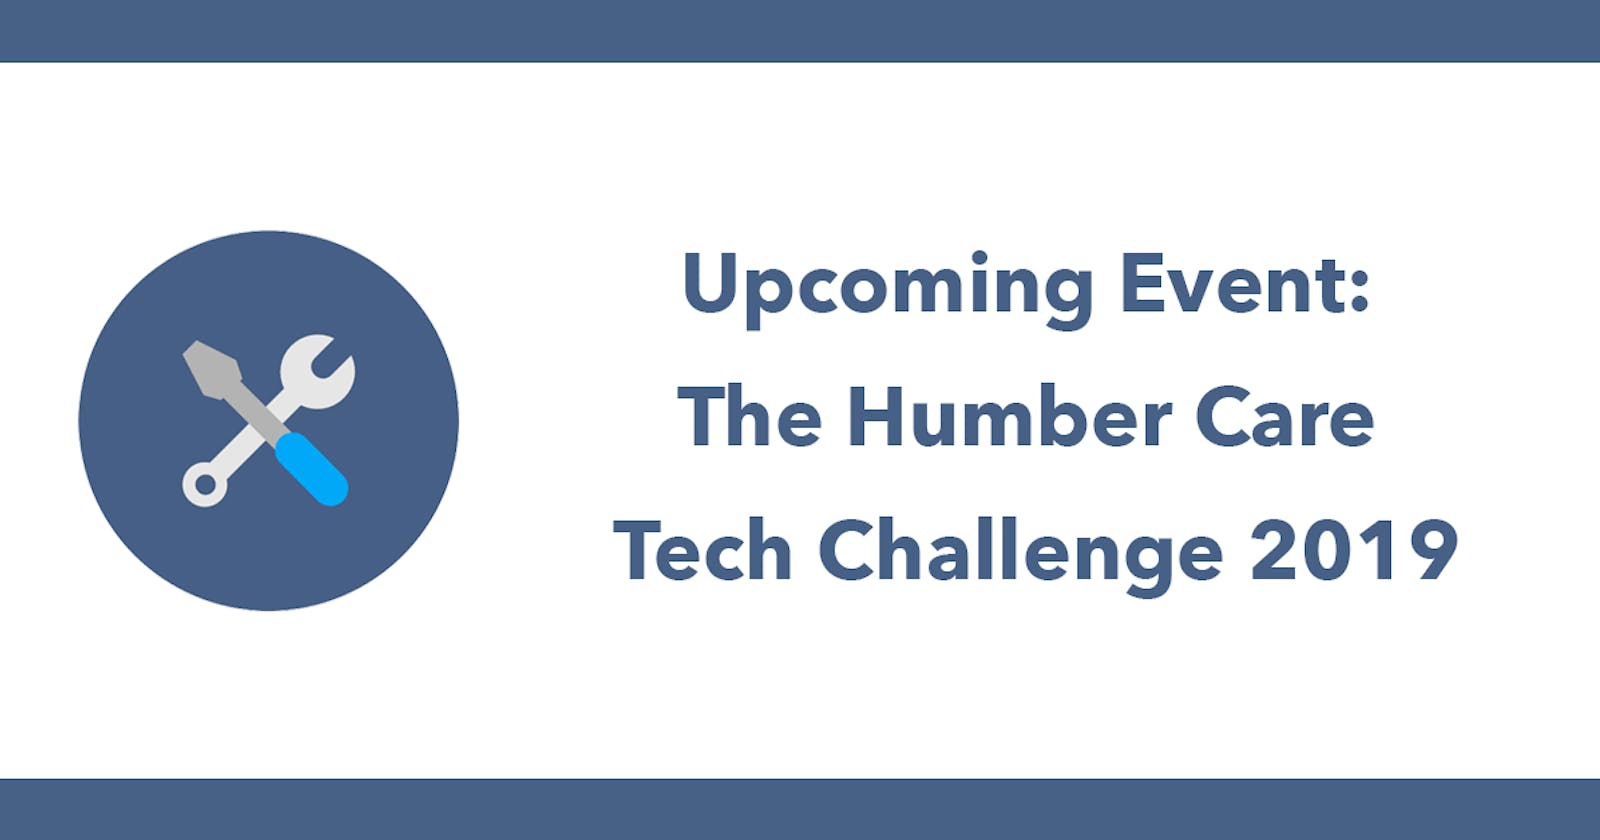 Upcoming Event: The Humber Care Tech Challenge 2019